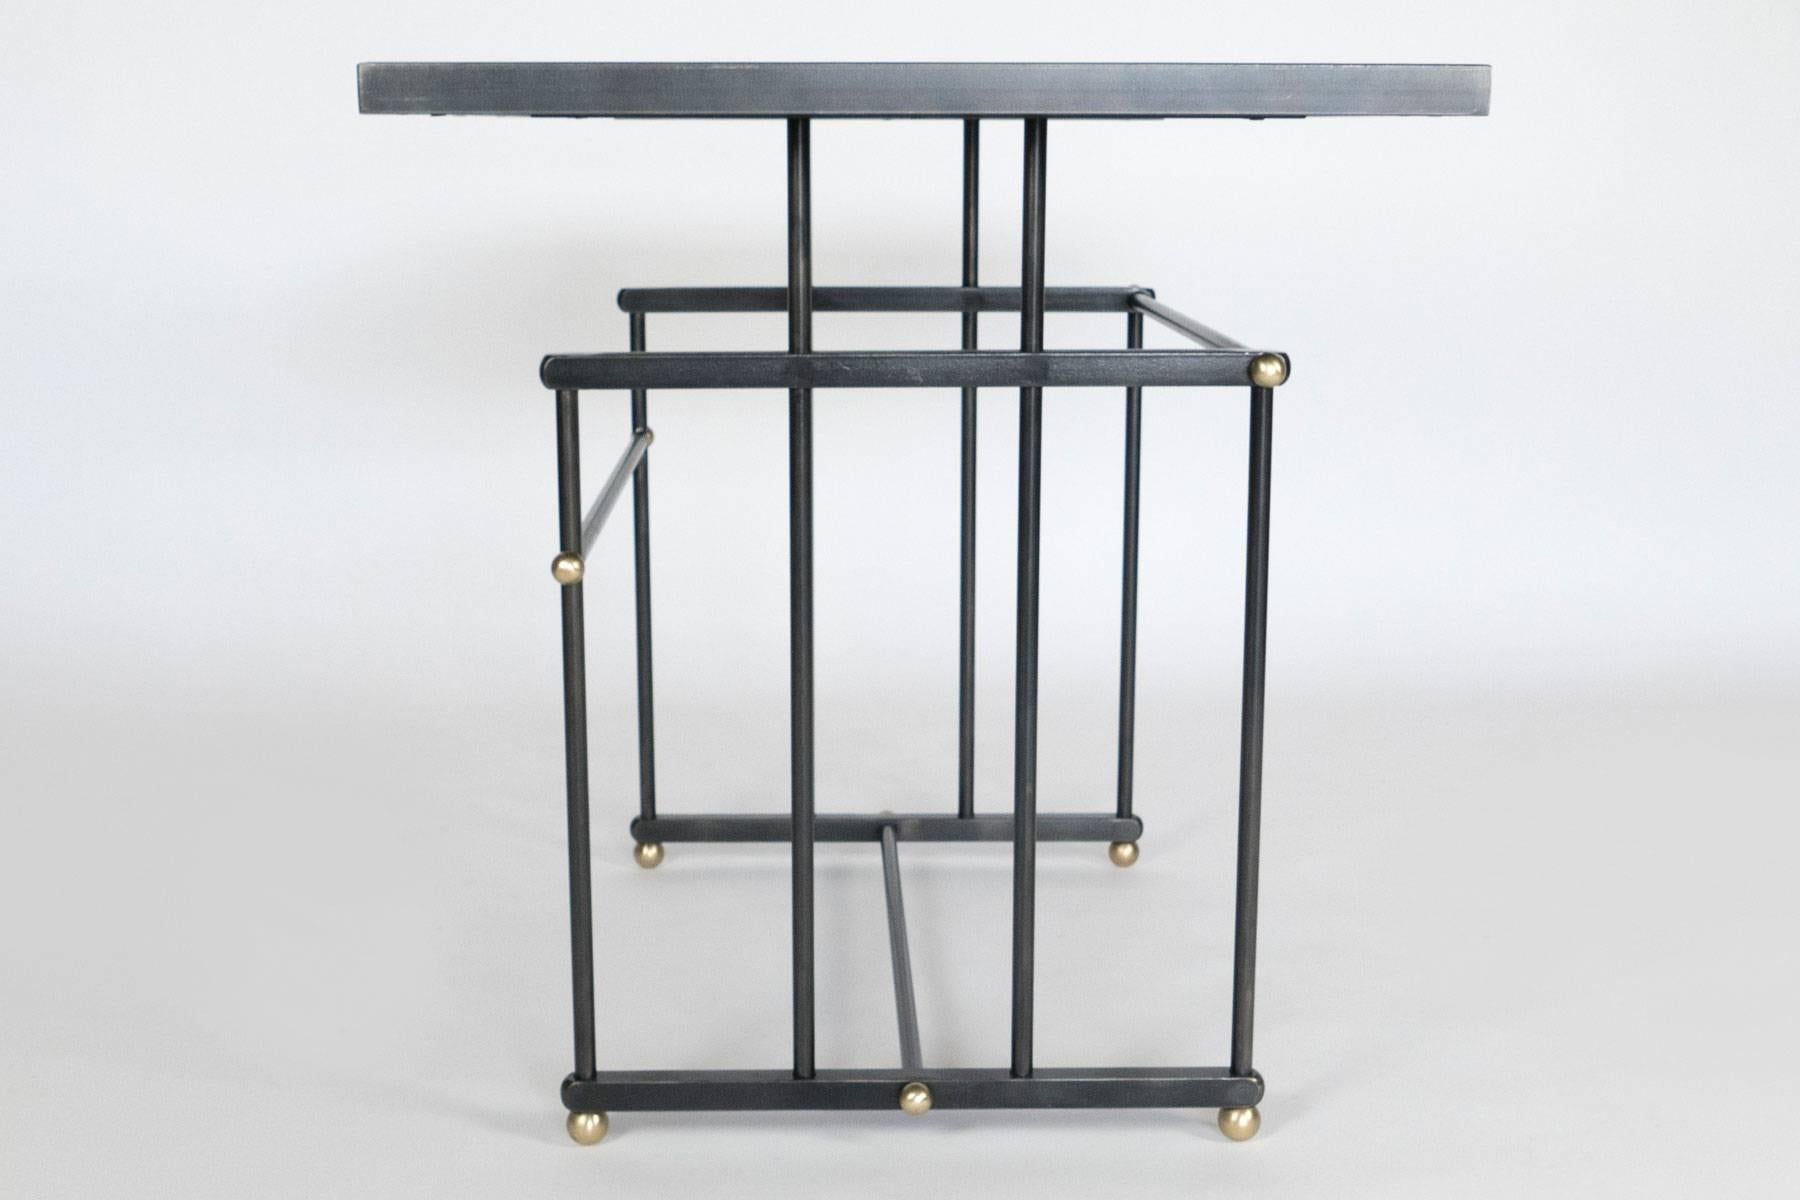 Two beautiful side table with a steel frame and brass accents. The tabletops are blue palisander veneer. A matching console table is also available. Tables are located in our NYC showroom in the NY Design Center at  200 Lex.